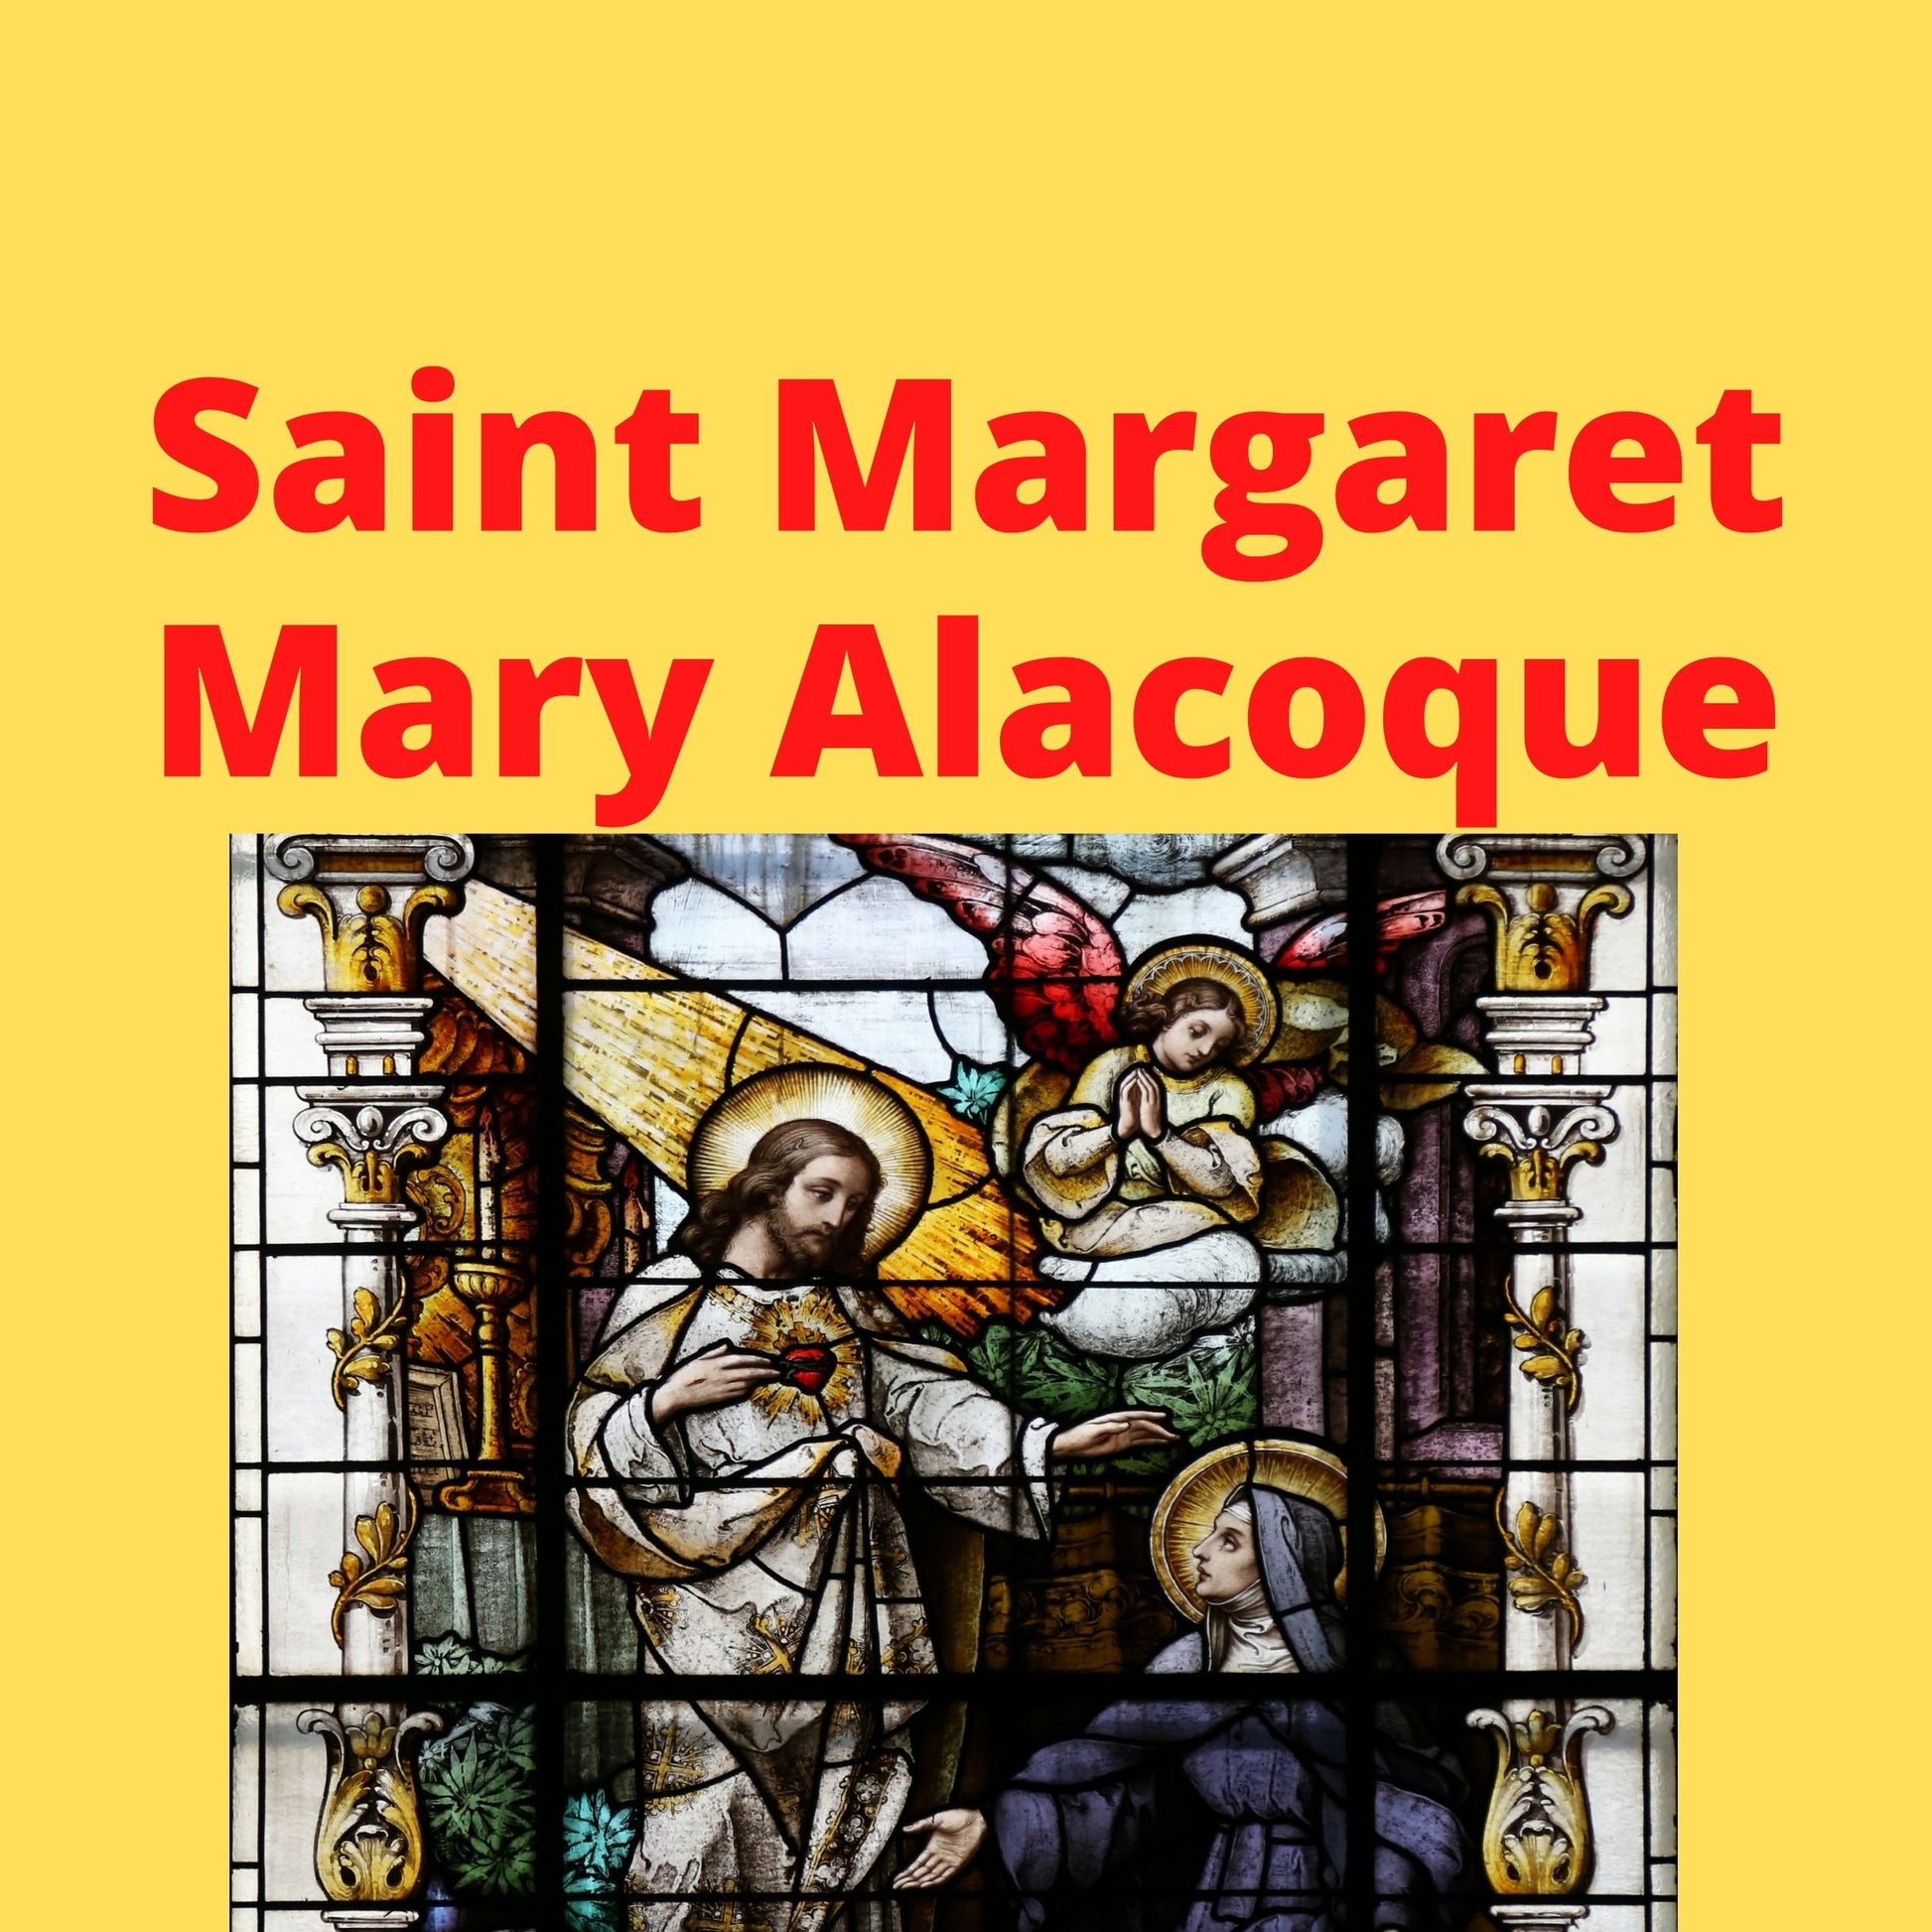 Saint Margaret Mary Alacoque Video Download MP4 - Bob and Penny Lord